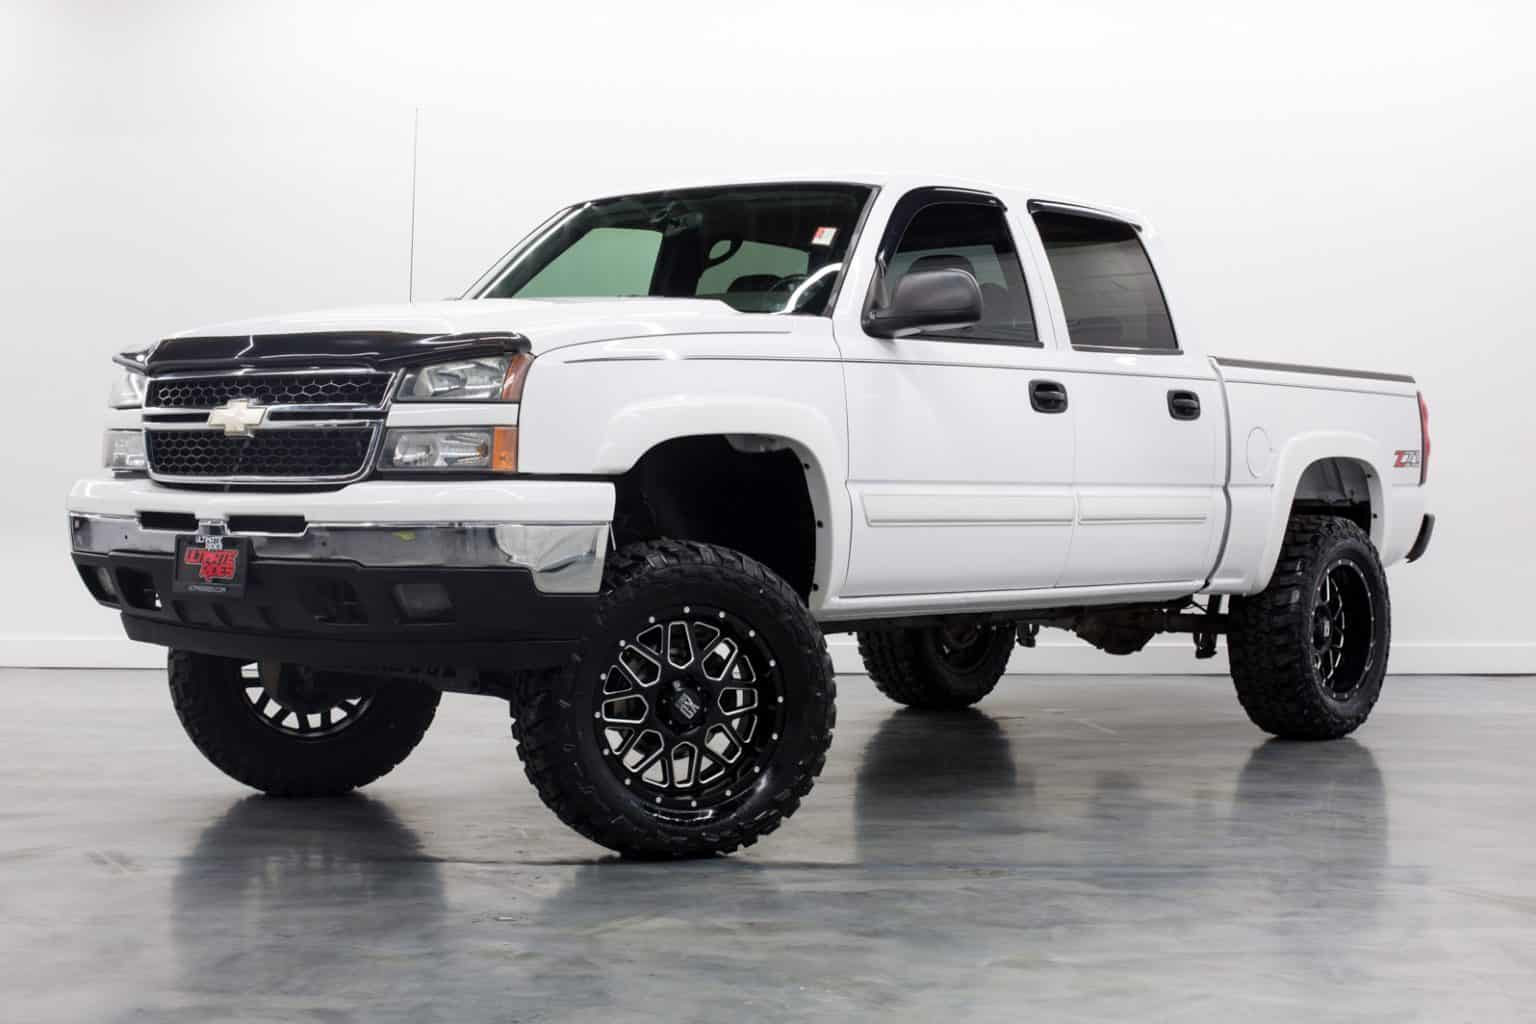 Lifted Trucks for Sale in New Mexico